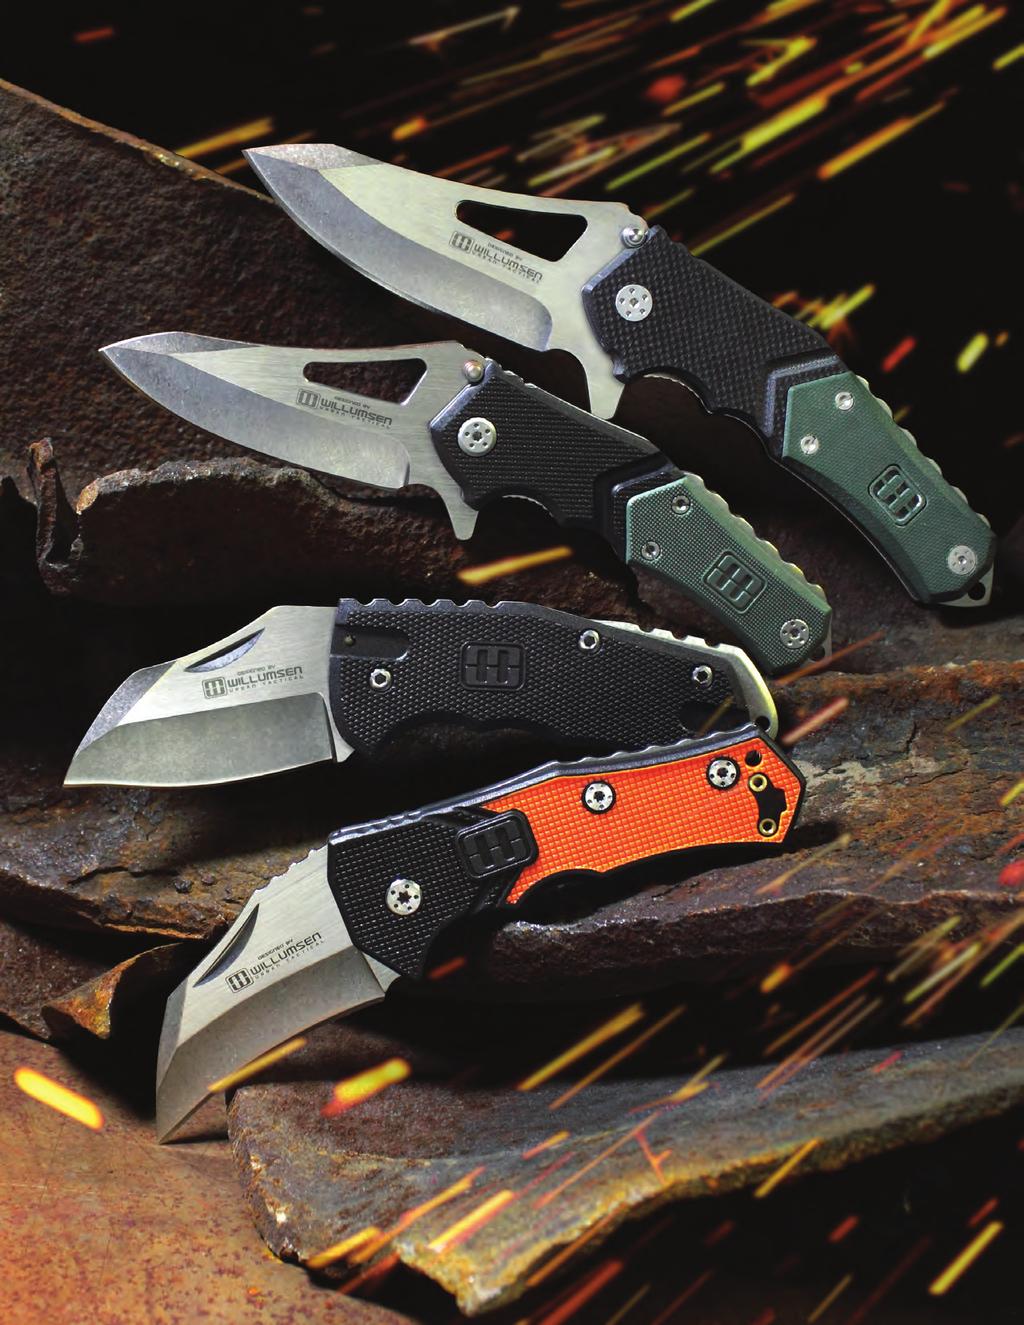 URBAN TACTICAL knives One of the best things about my World Legal is, in all my travels as a helicopter pilot I could take this knife anywhere New York, all through the